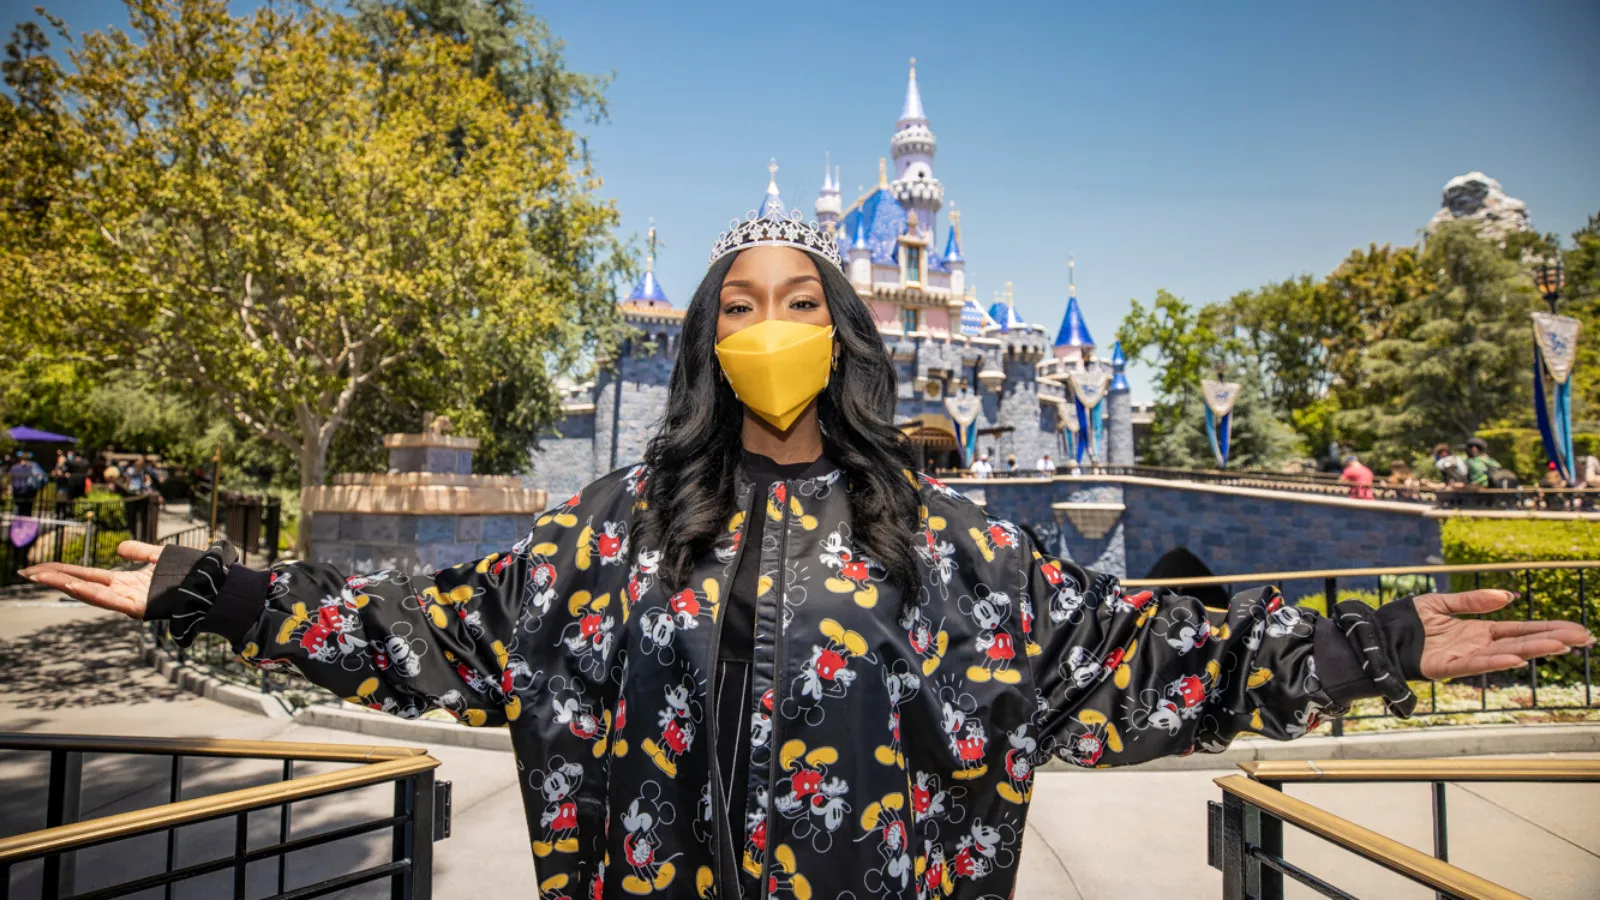 Brandy, poses in front of Sleeping Beauty Castle in Disneyland Park on May 23, 2021 in Anaheim, California.